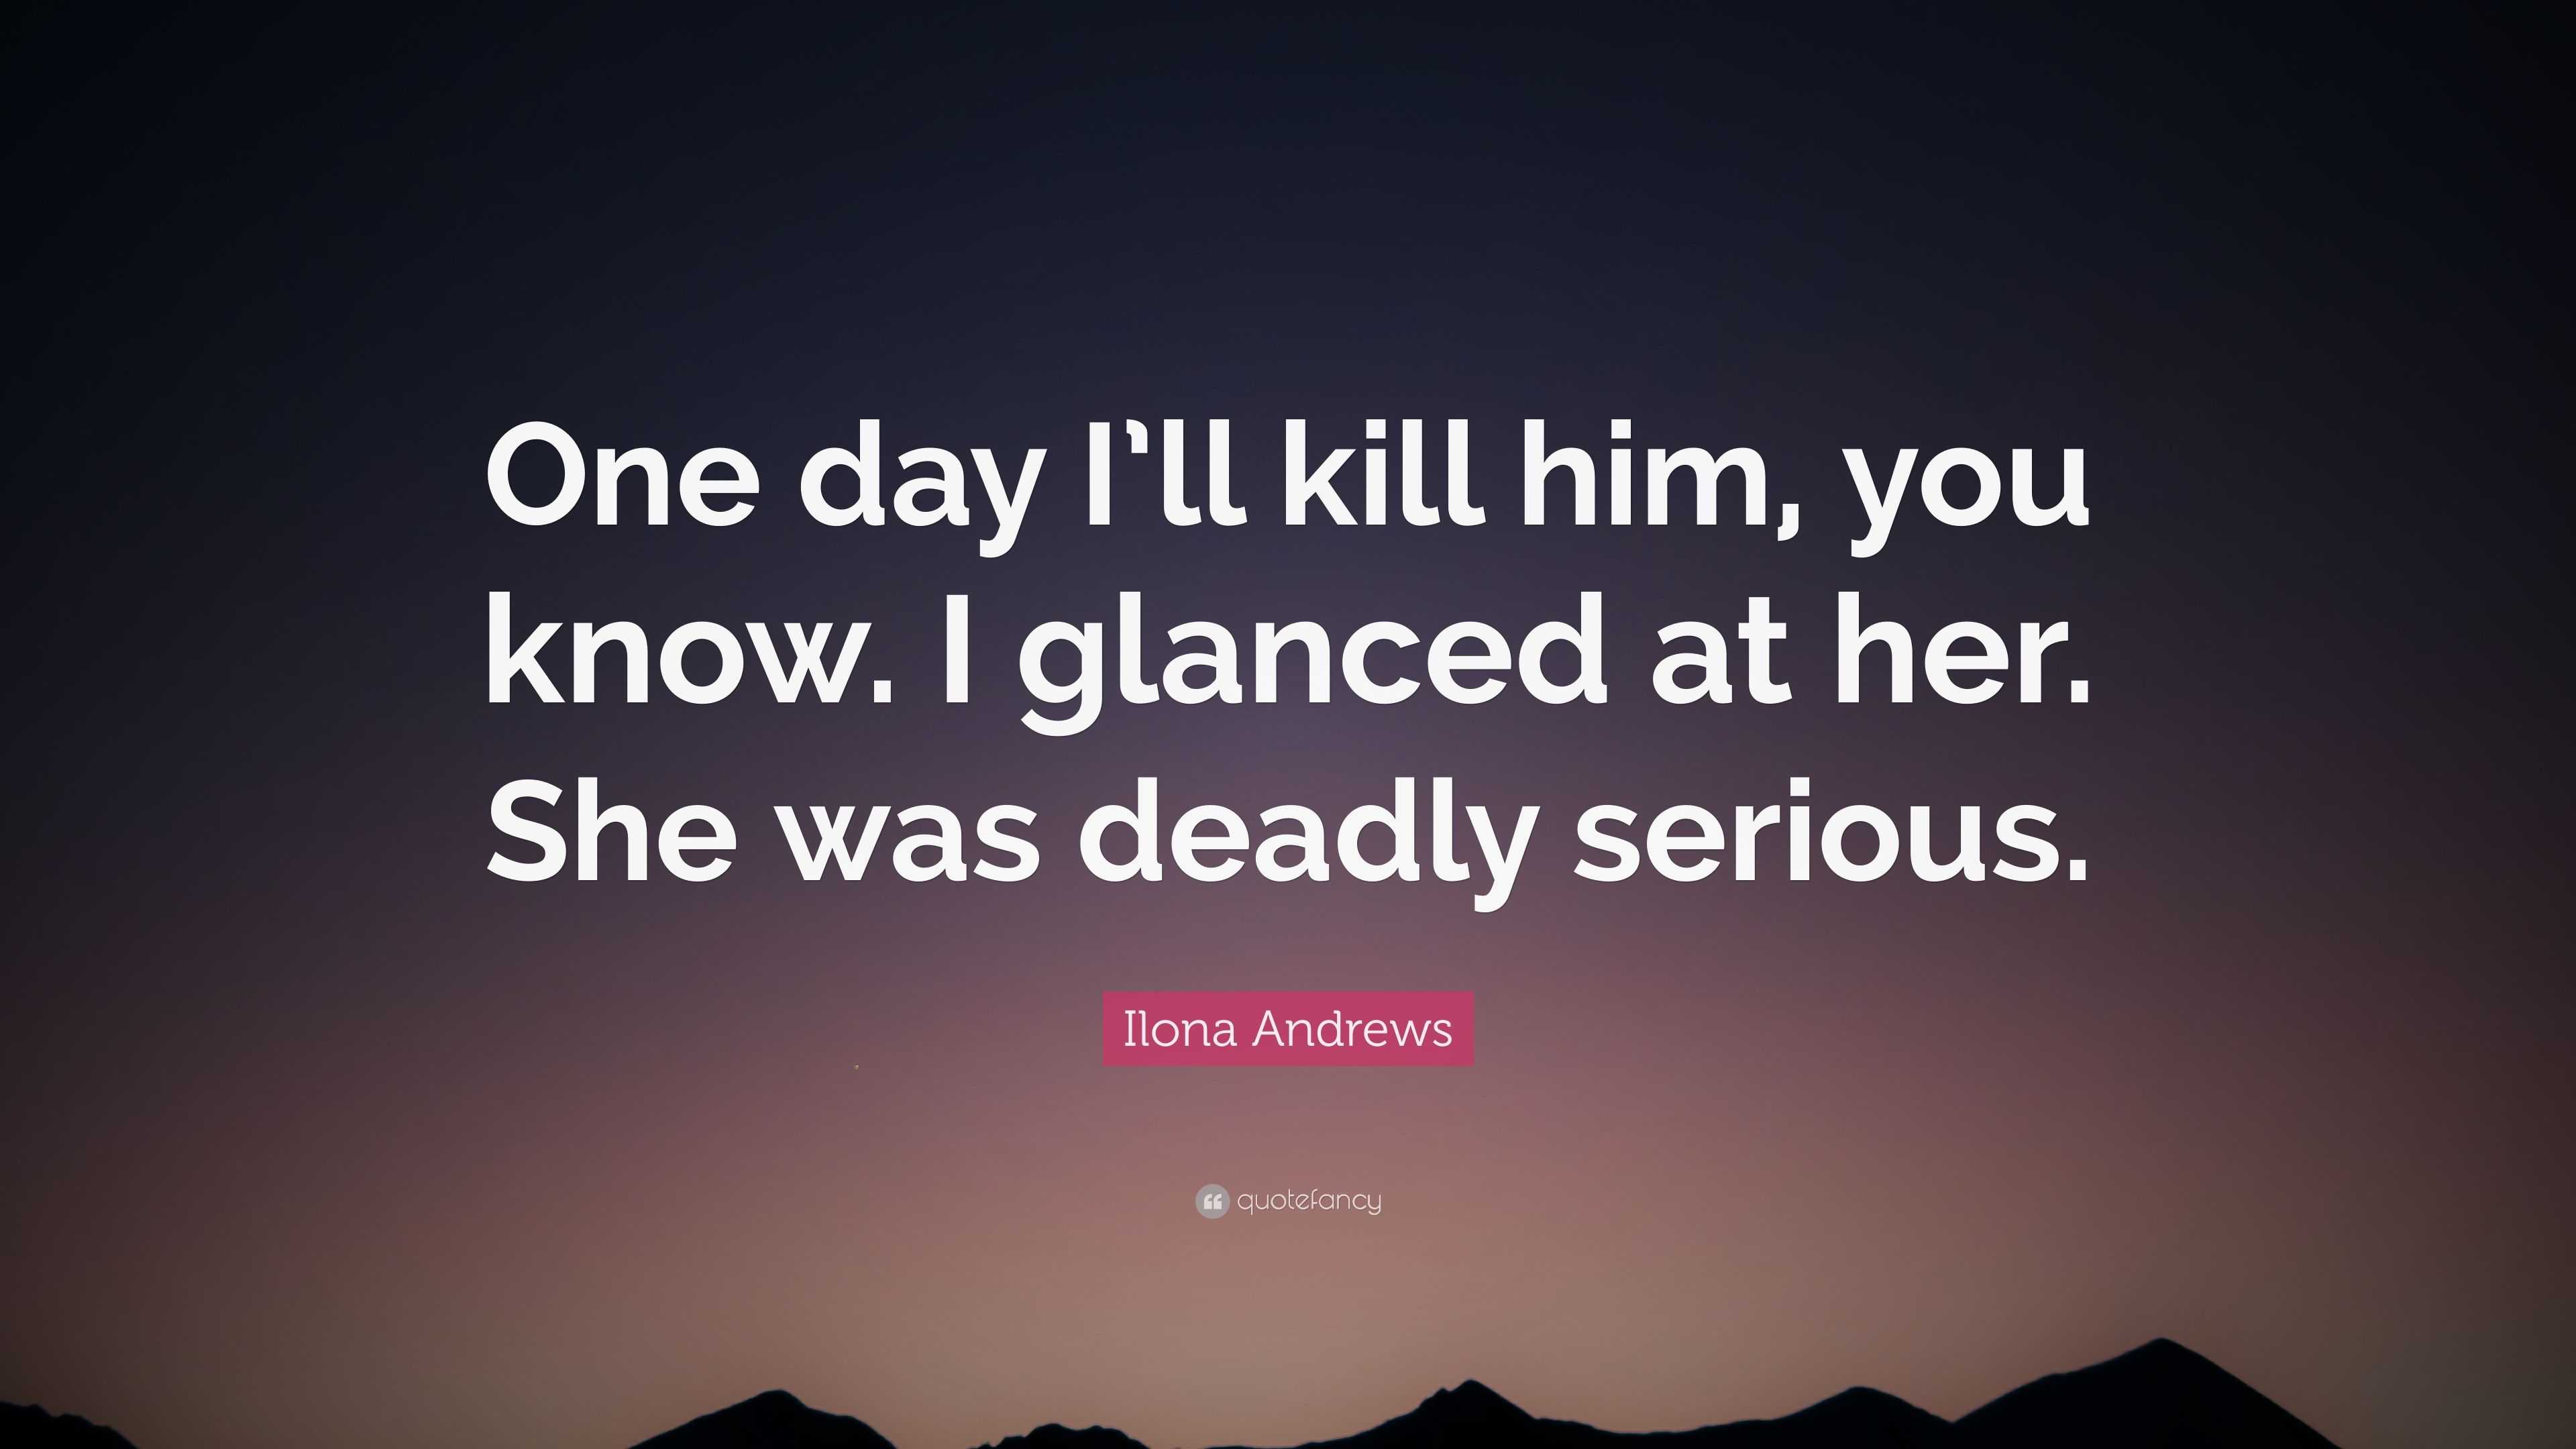 Ilona Andrews Quote: “One day I’ll kill him, you know. I glanced at her ...